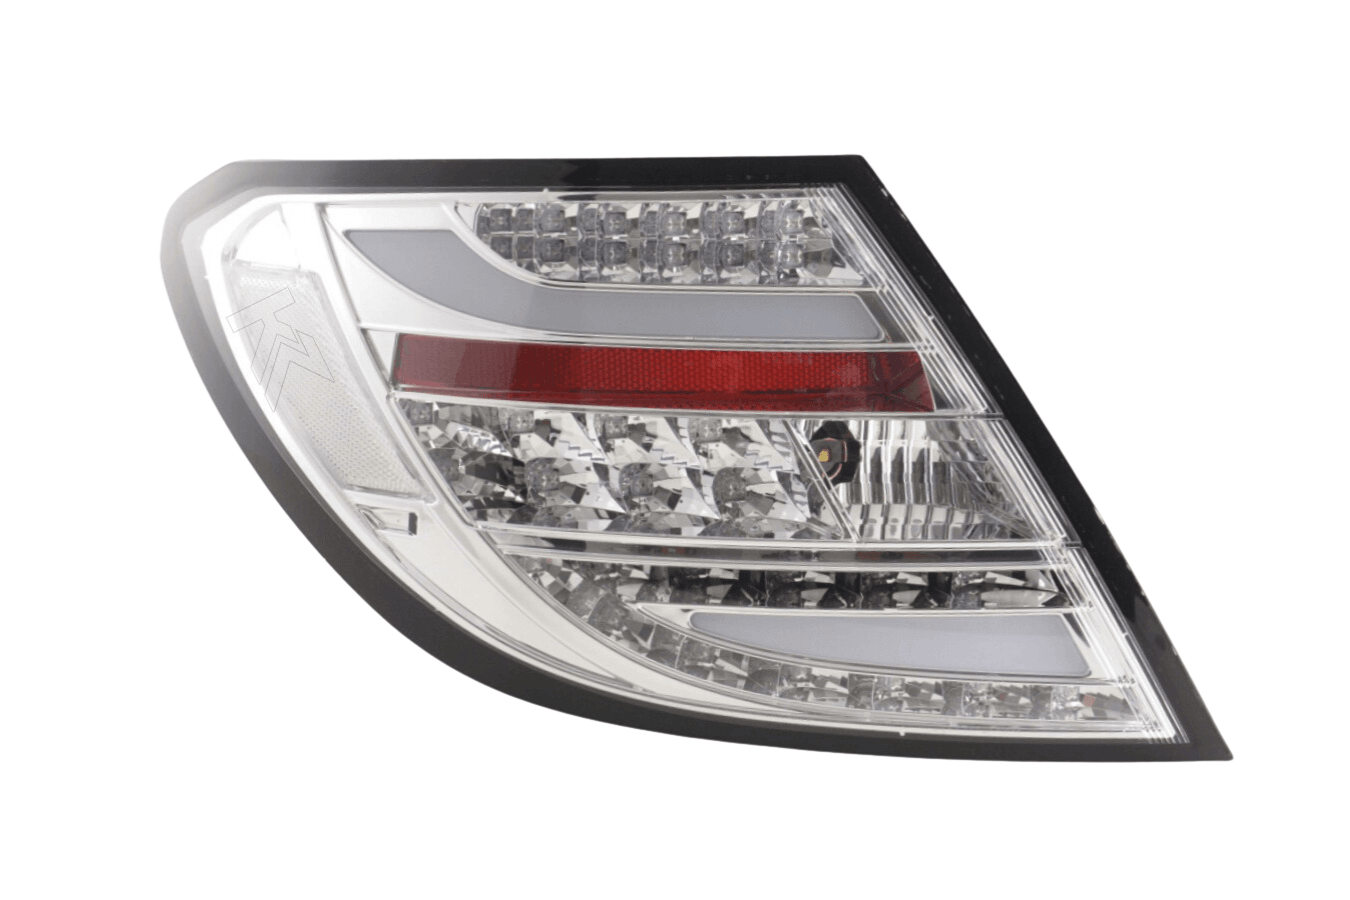 Mercedes Benz C-Class (204) Chrome Clear LED Taillights Set (2007-2011) - K2 Industries